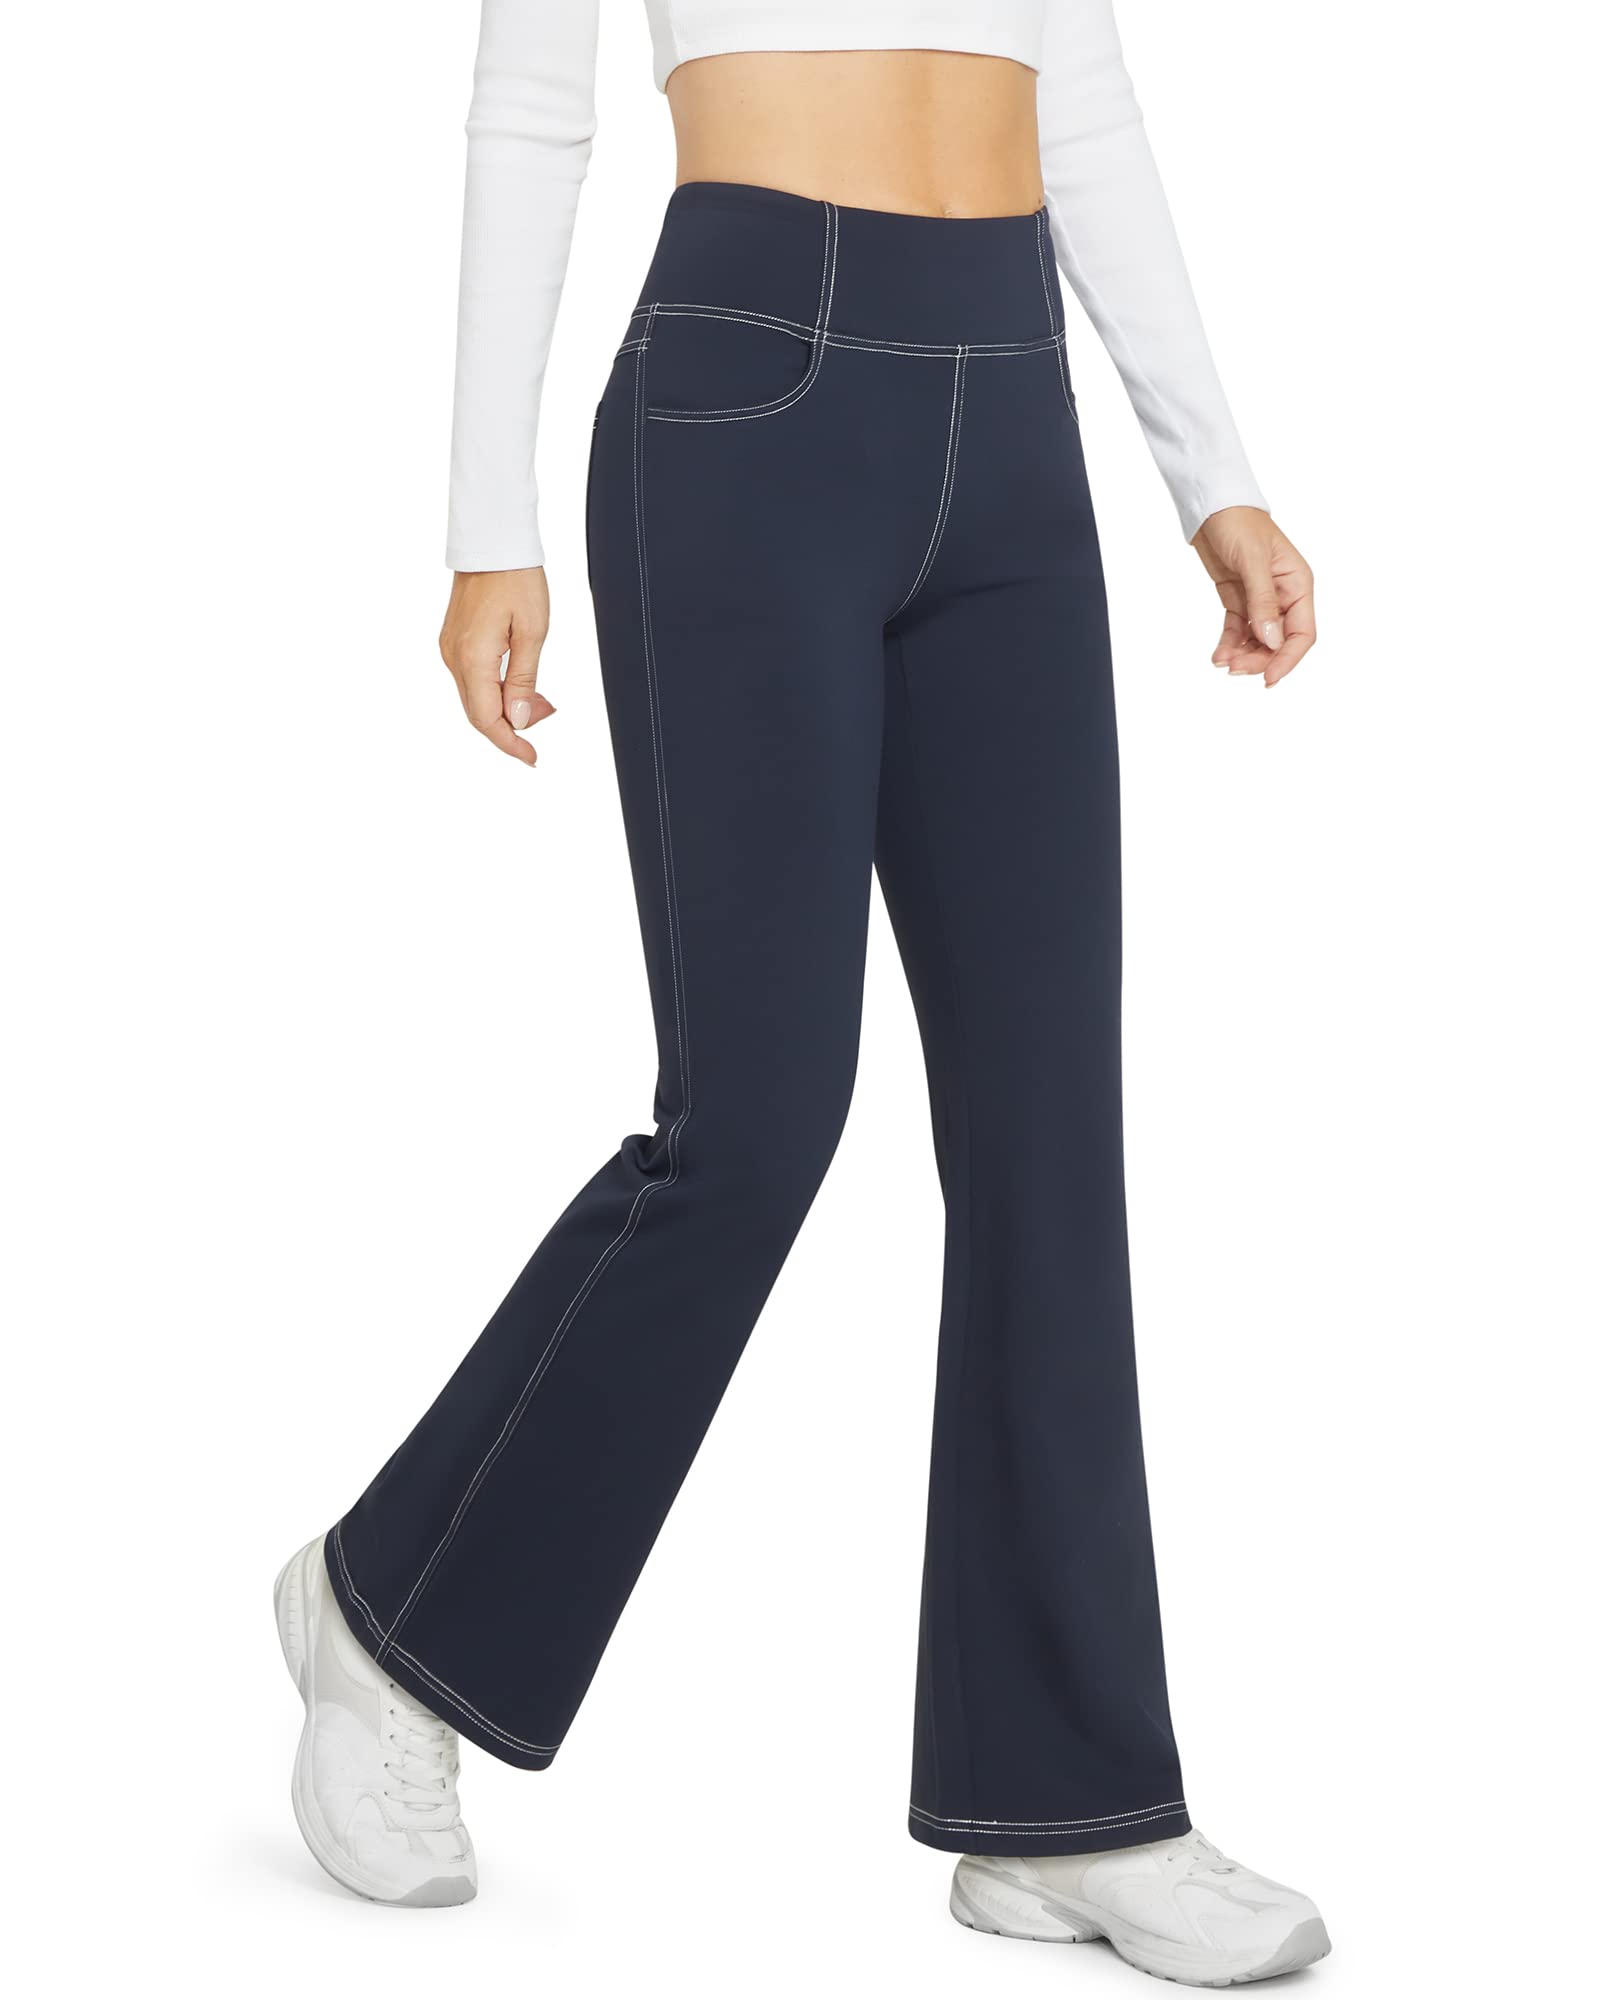 Navy Fleece Lined Leggings With Pockets · Filly Flair